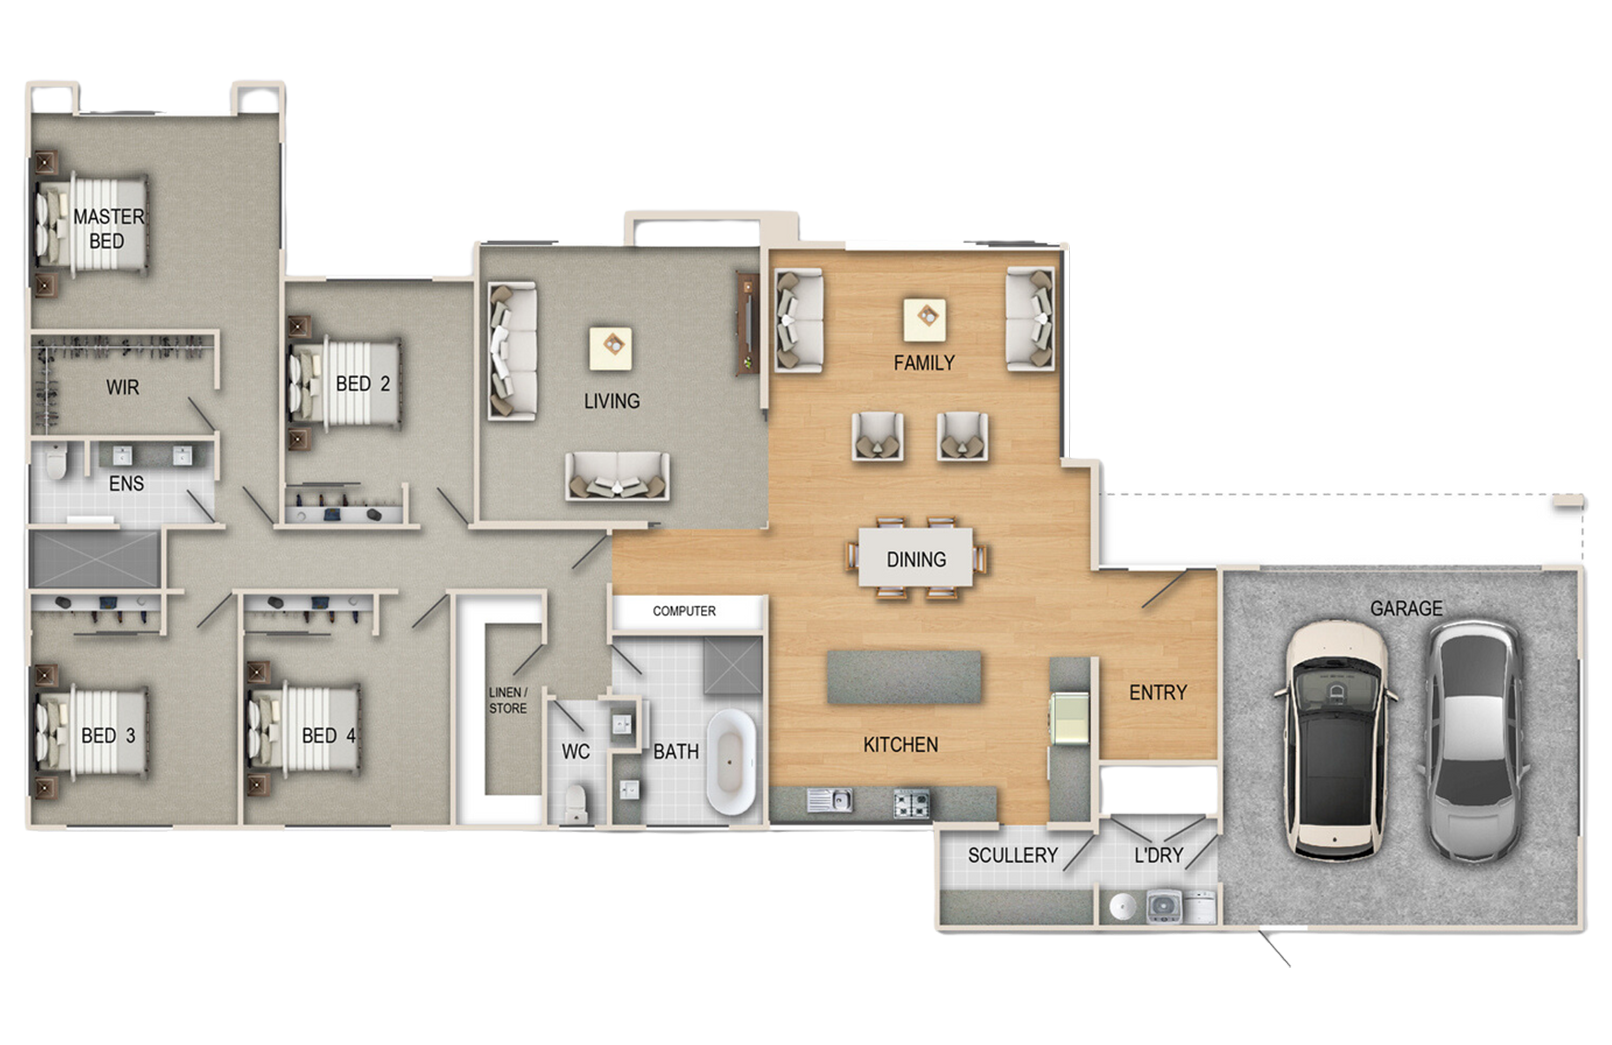 Open plan living, 4 bedrooms, master suite with ensuite, separate amenities & two roof styles to choose from with the Dale Thorpe House Floor plan.